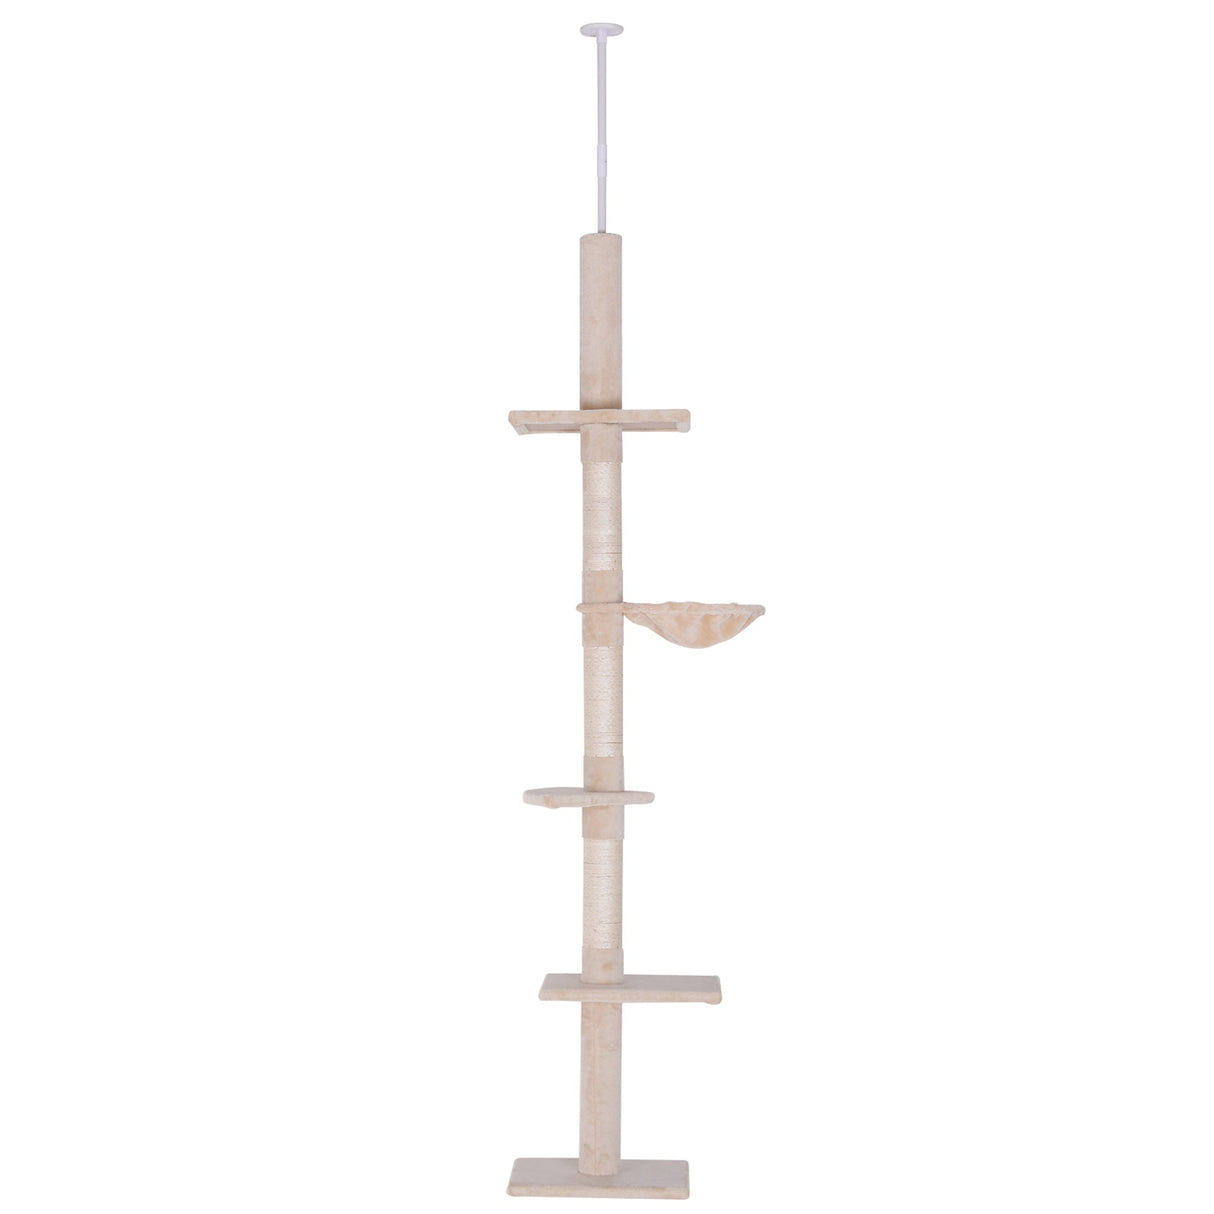 Floor to Ceiling Cat Tree for Indoor Cats 5-Tier Kitty Tower Climbing Activity Center Scratching Post Adjustable Height 230-260 cm, PawHut, Brown